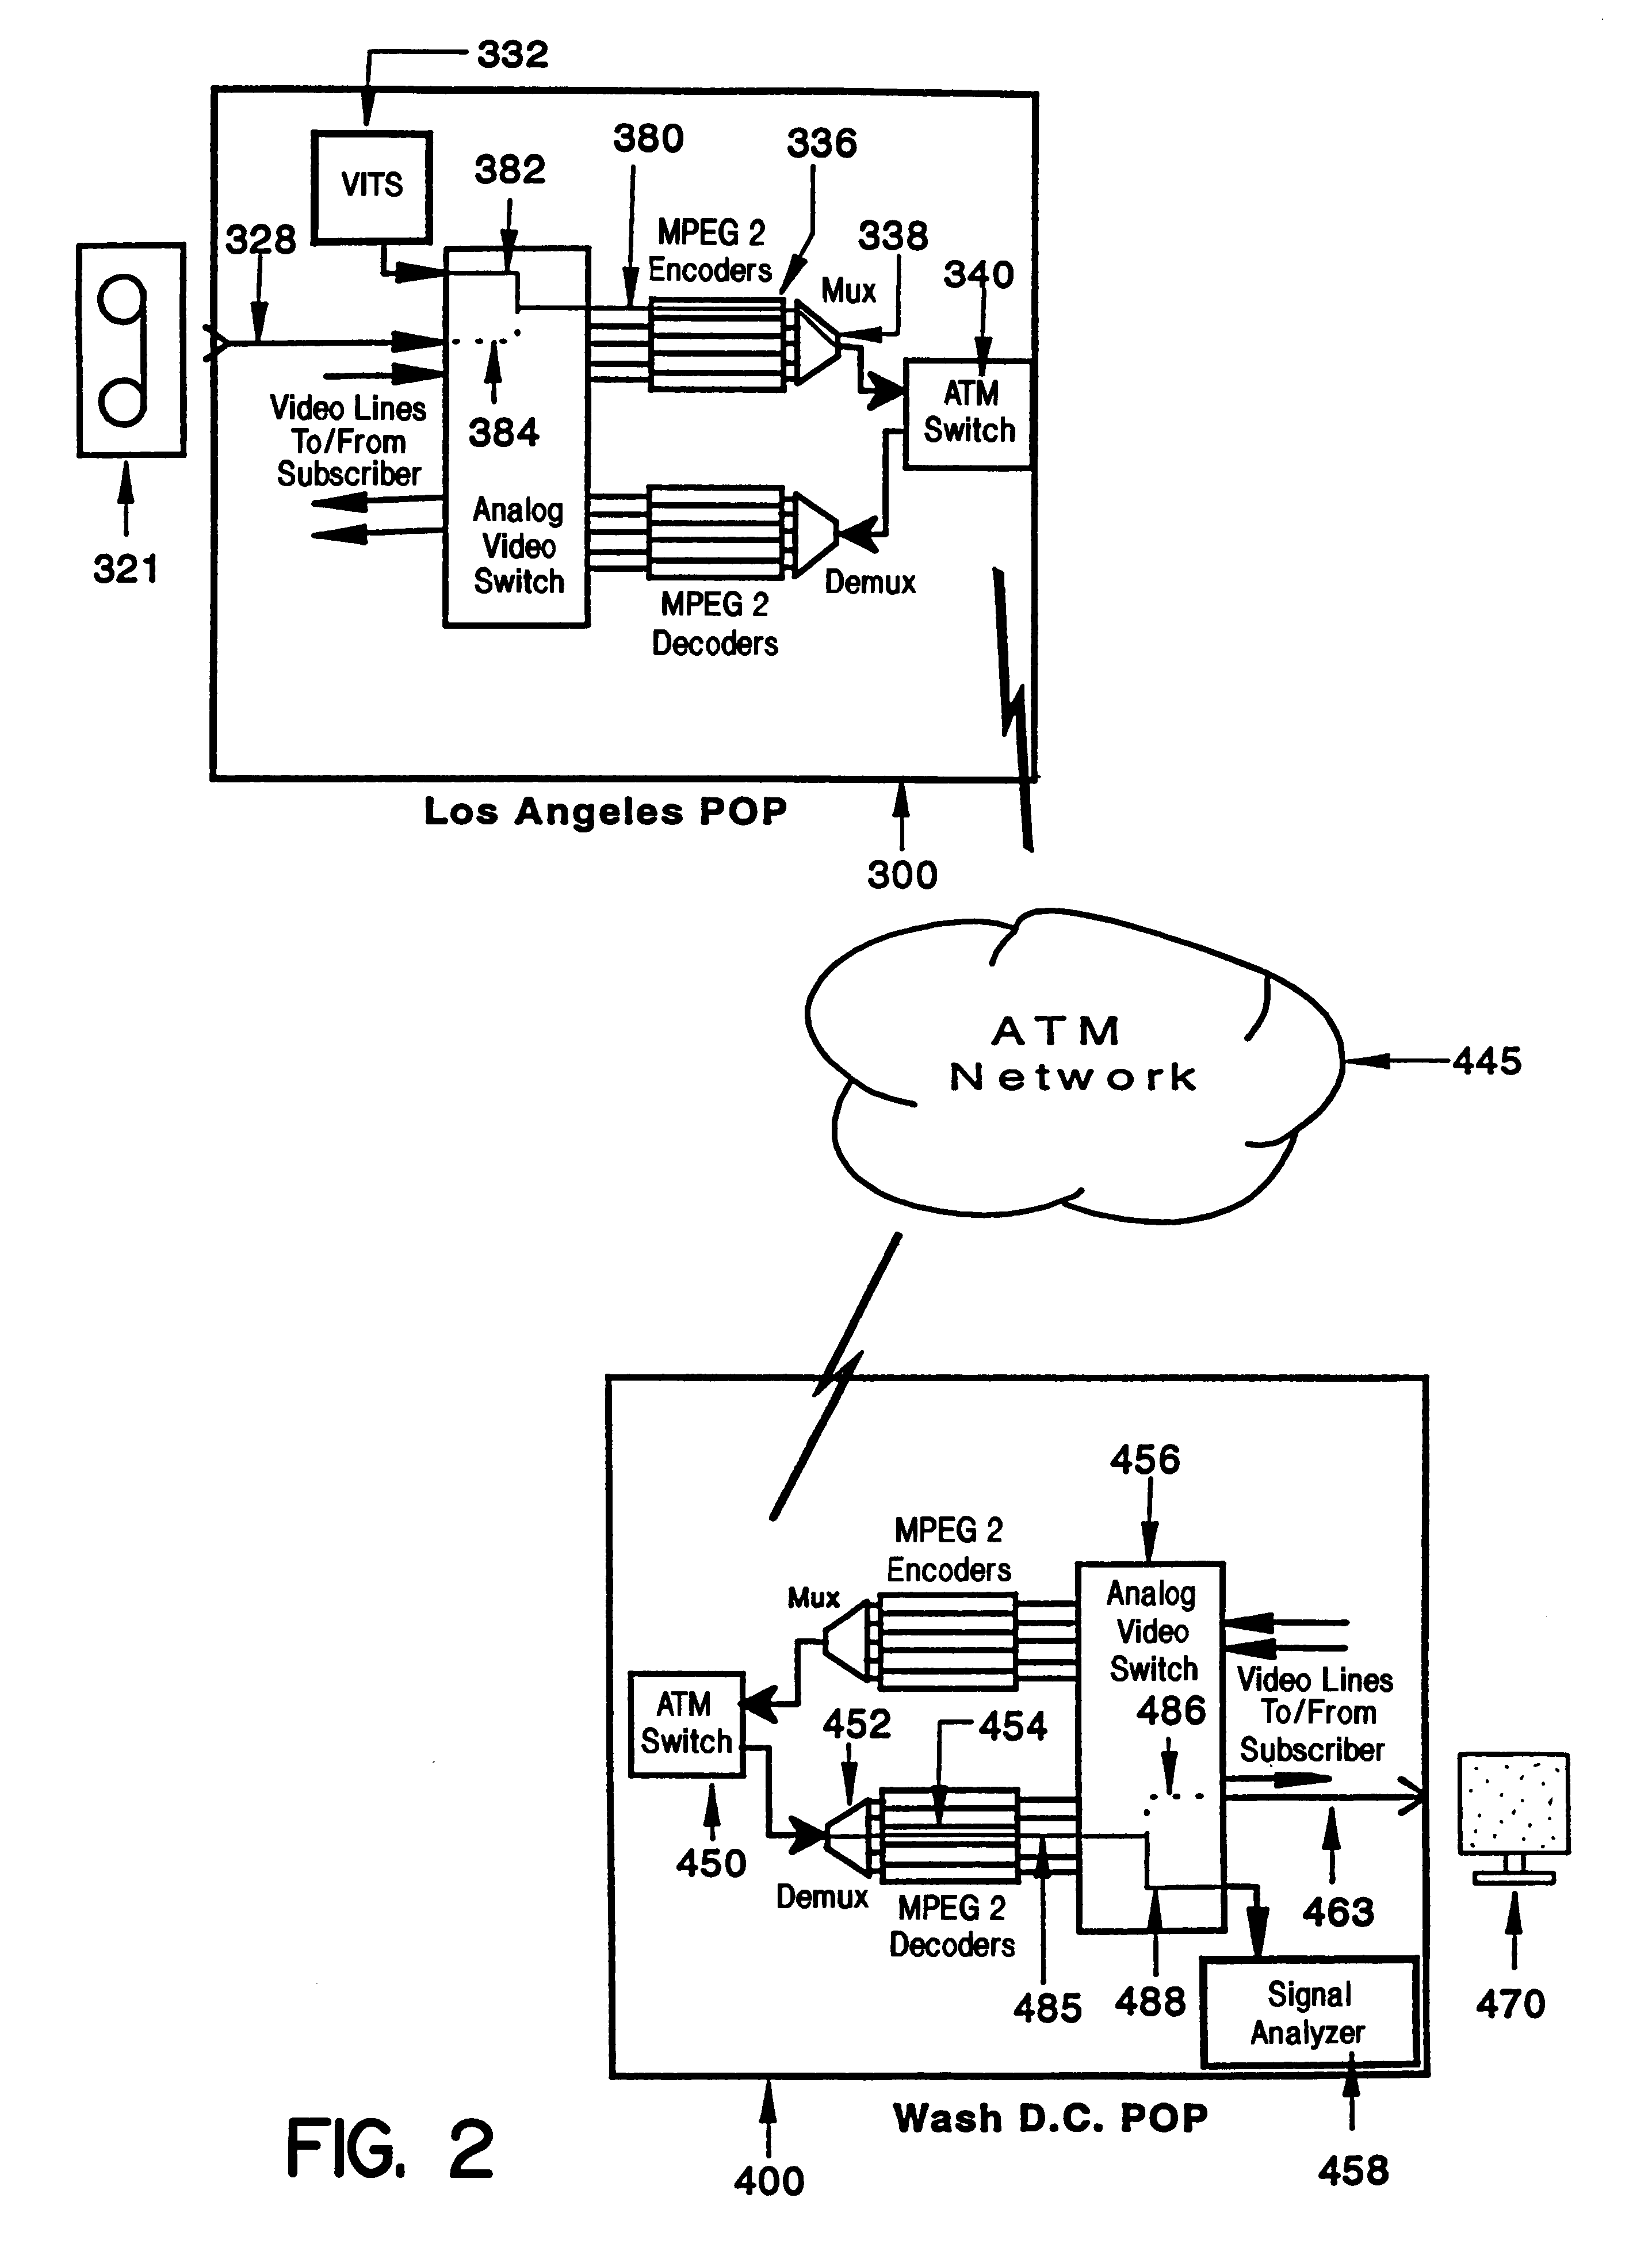 System and method of in-service testing of compressed digital broadcast video